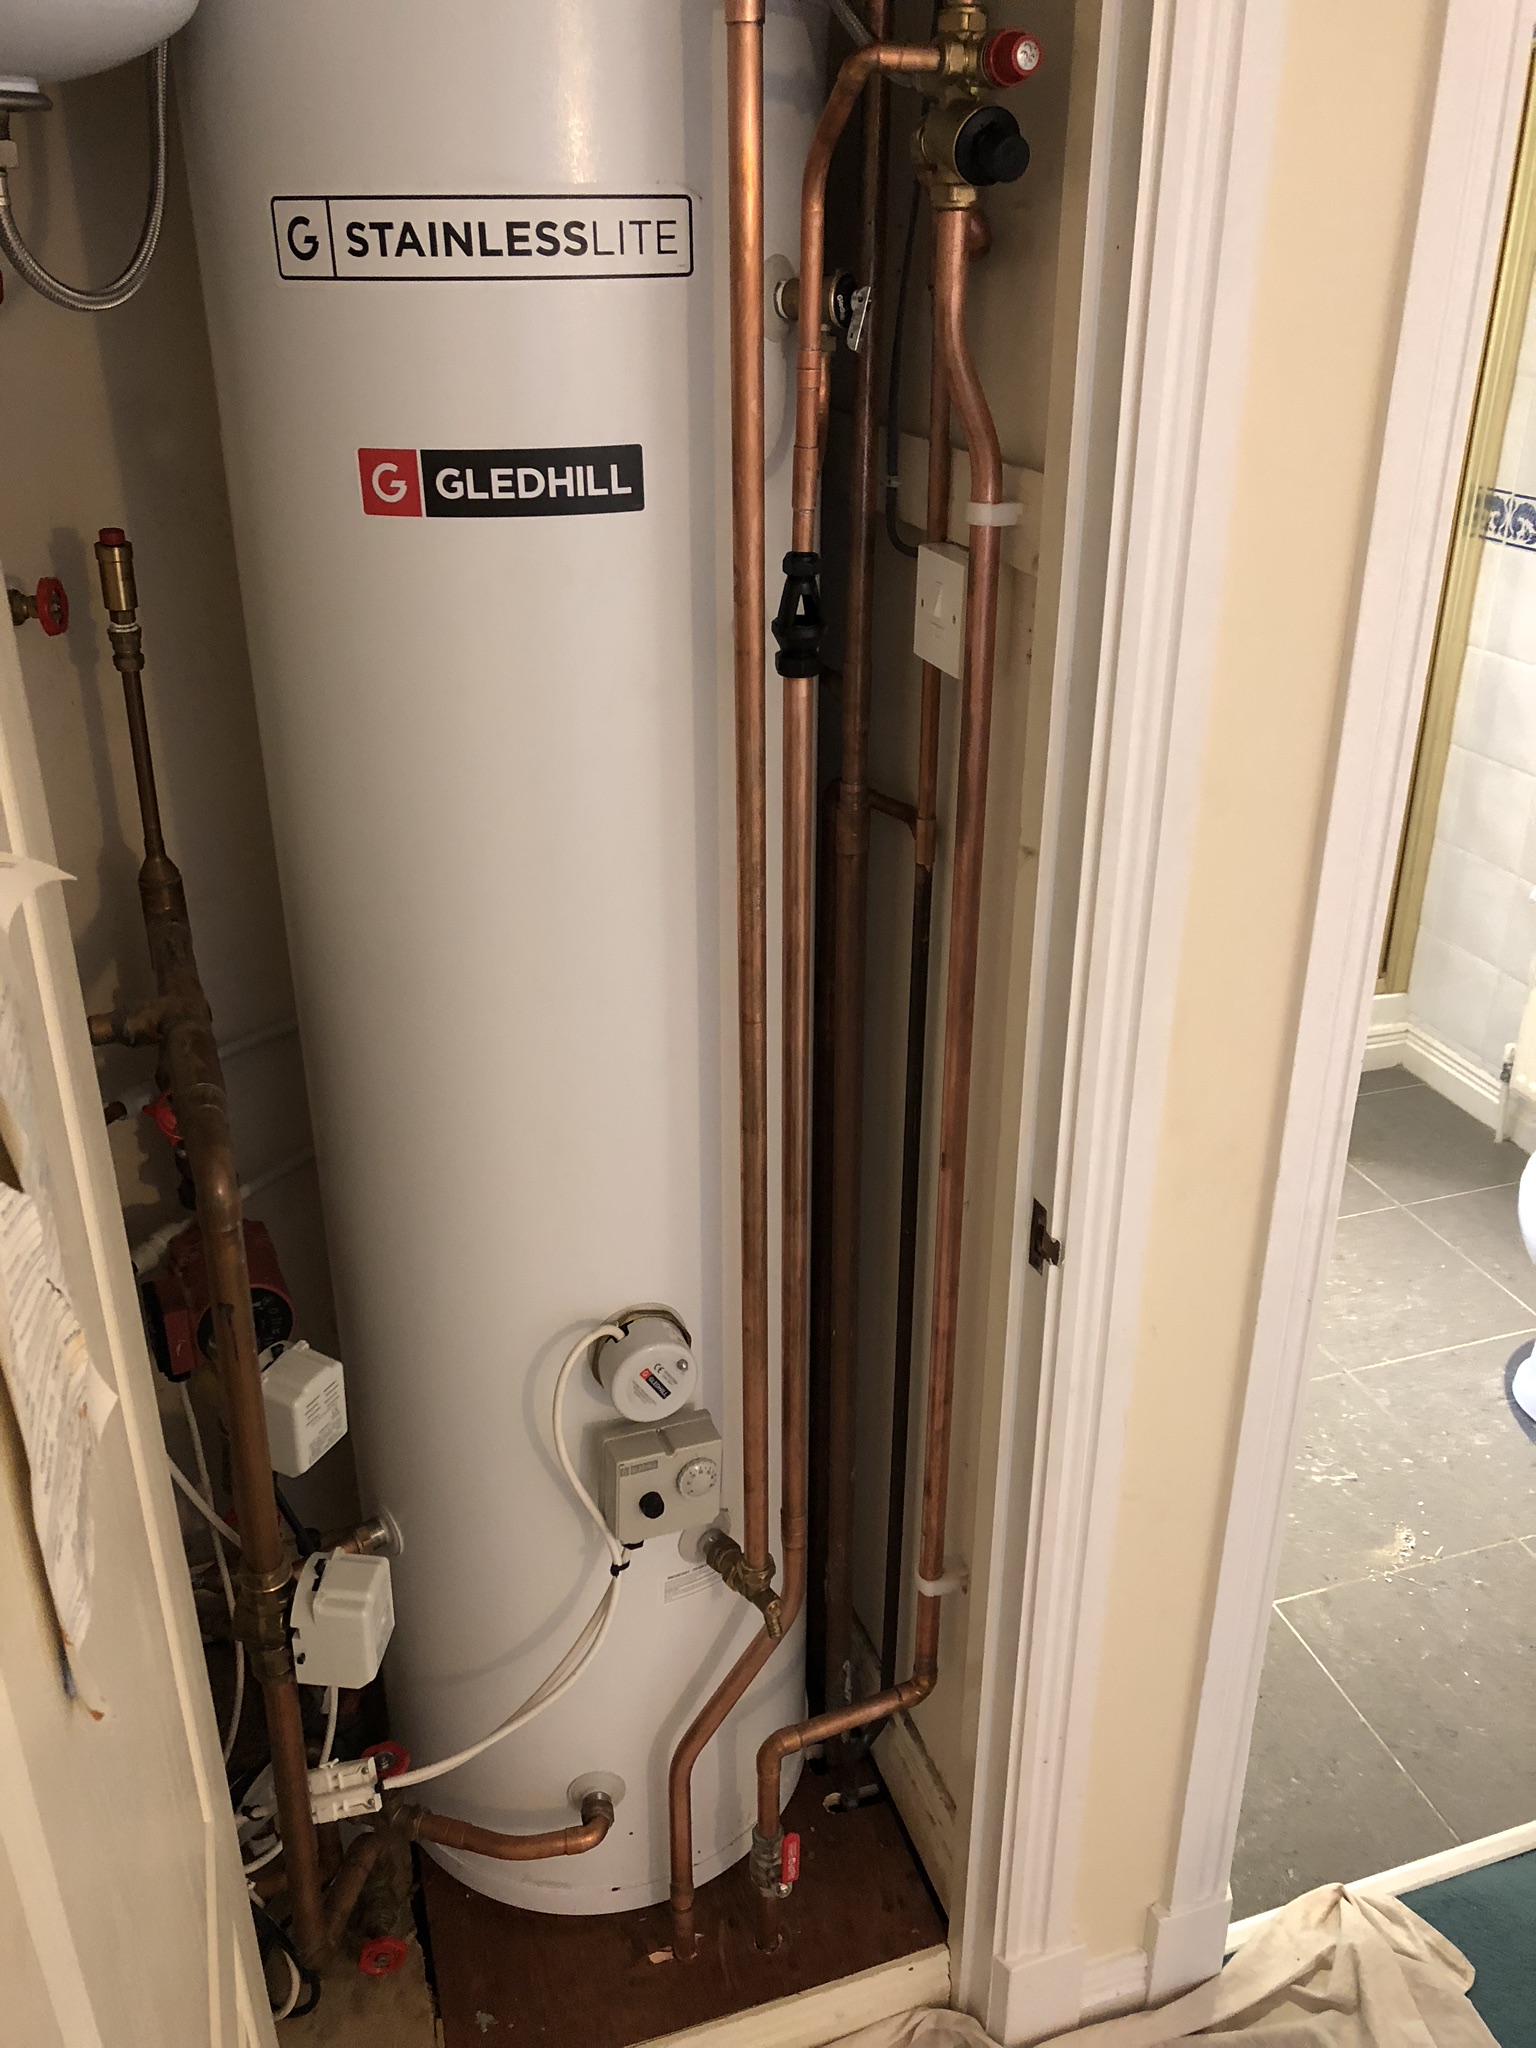 unvented hot water systems, gledhill